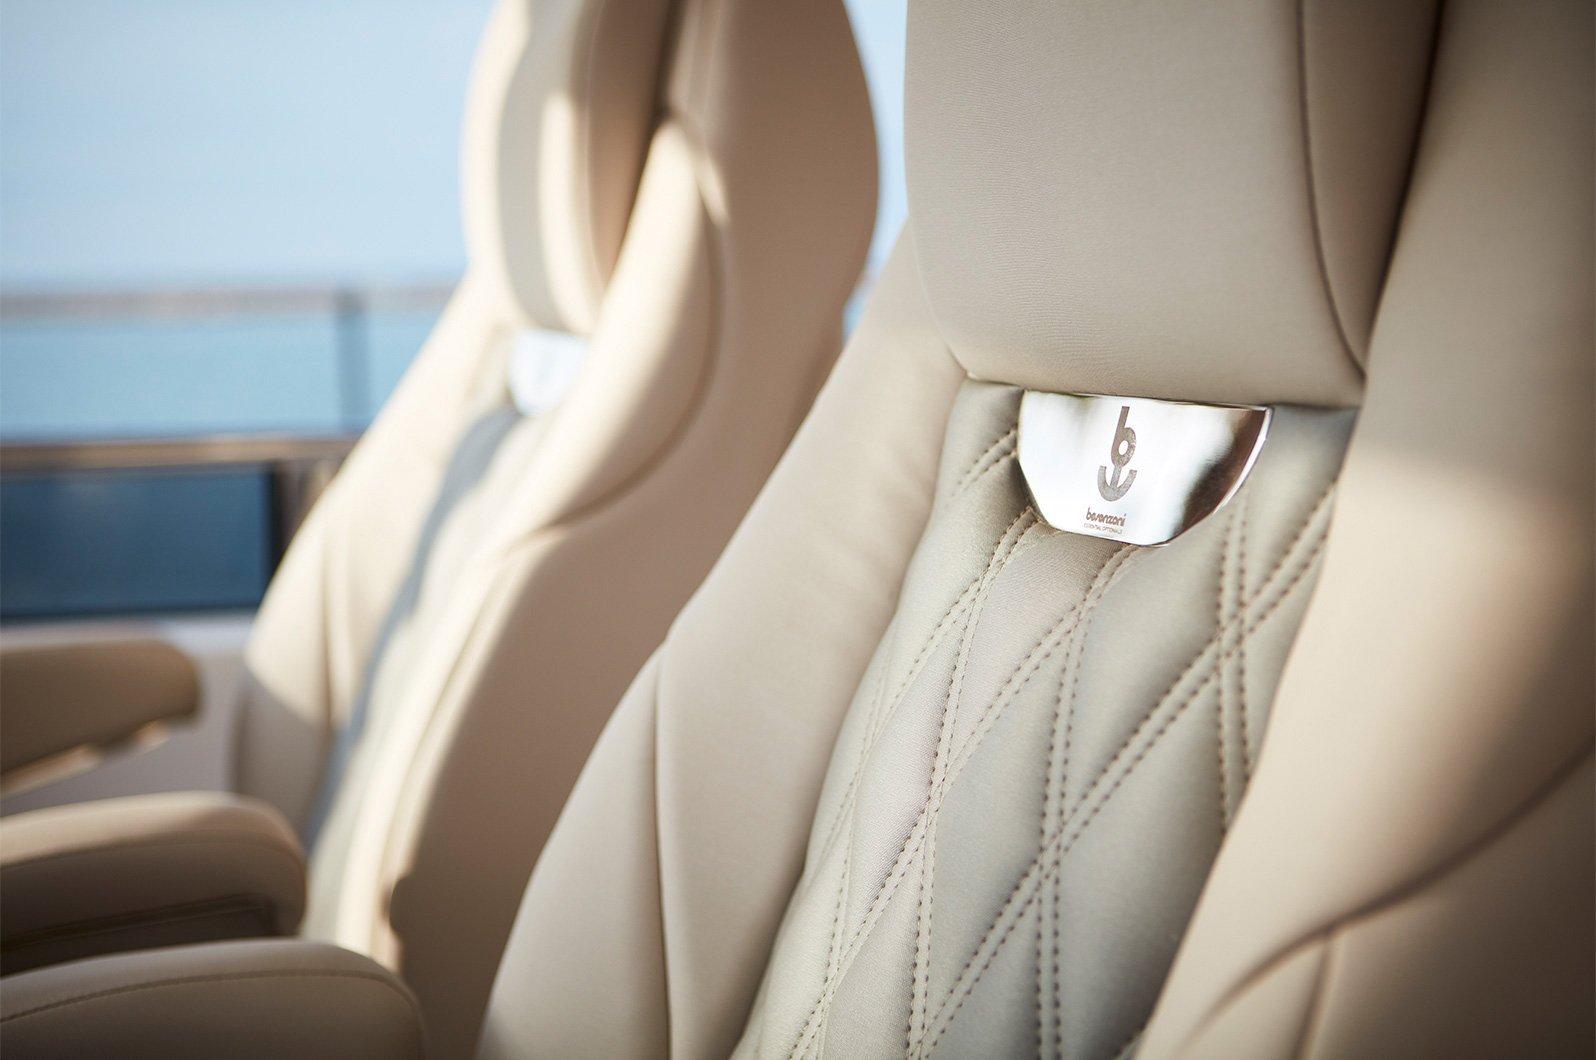 Exterior seat detail to convey the high quality finish.